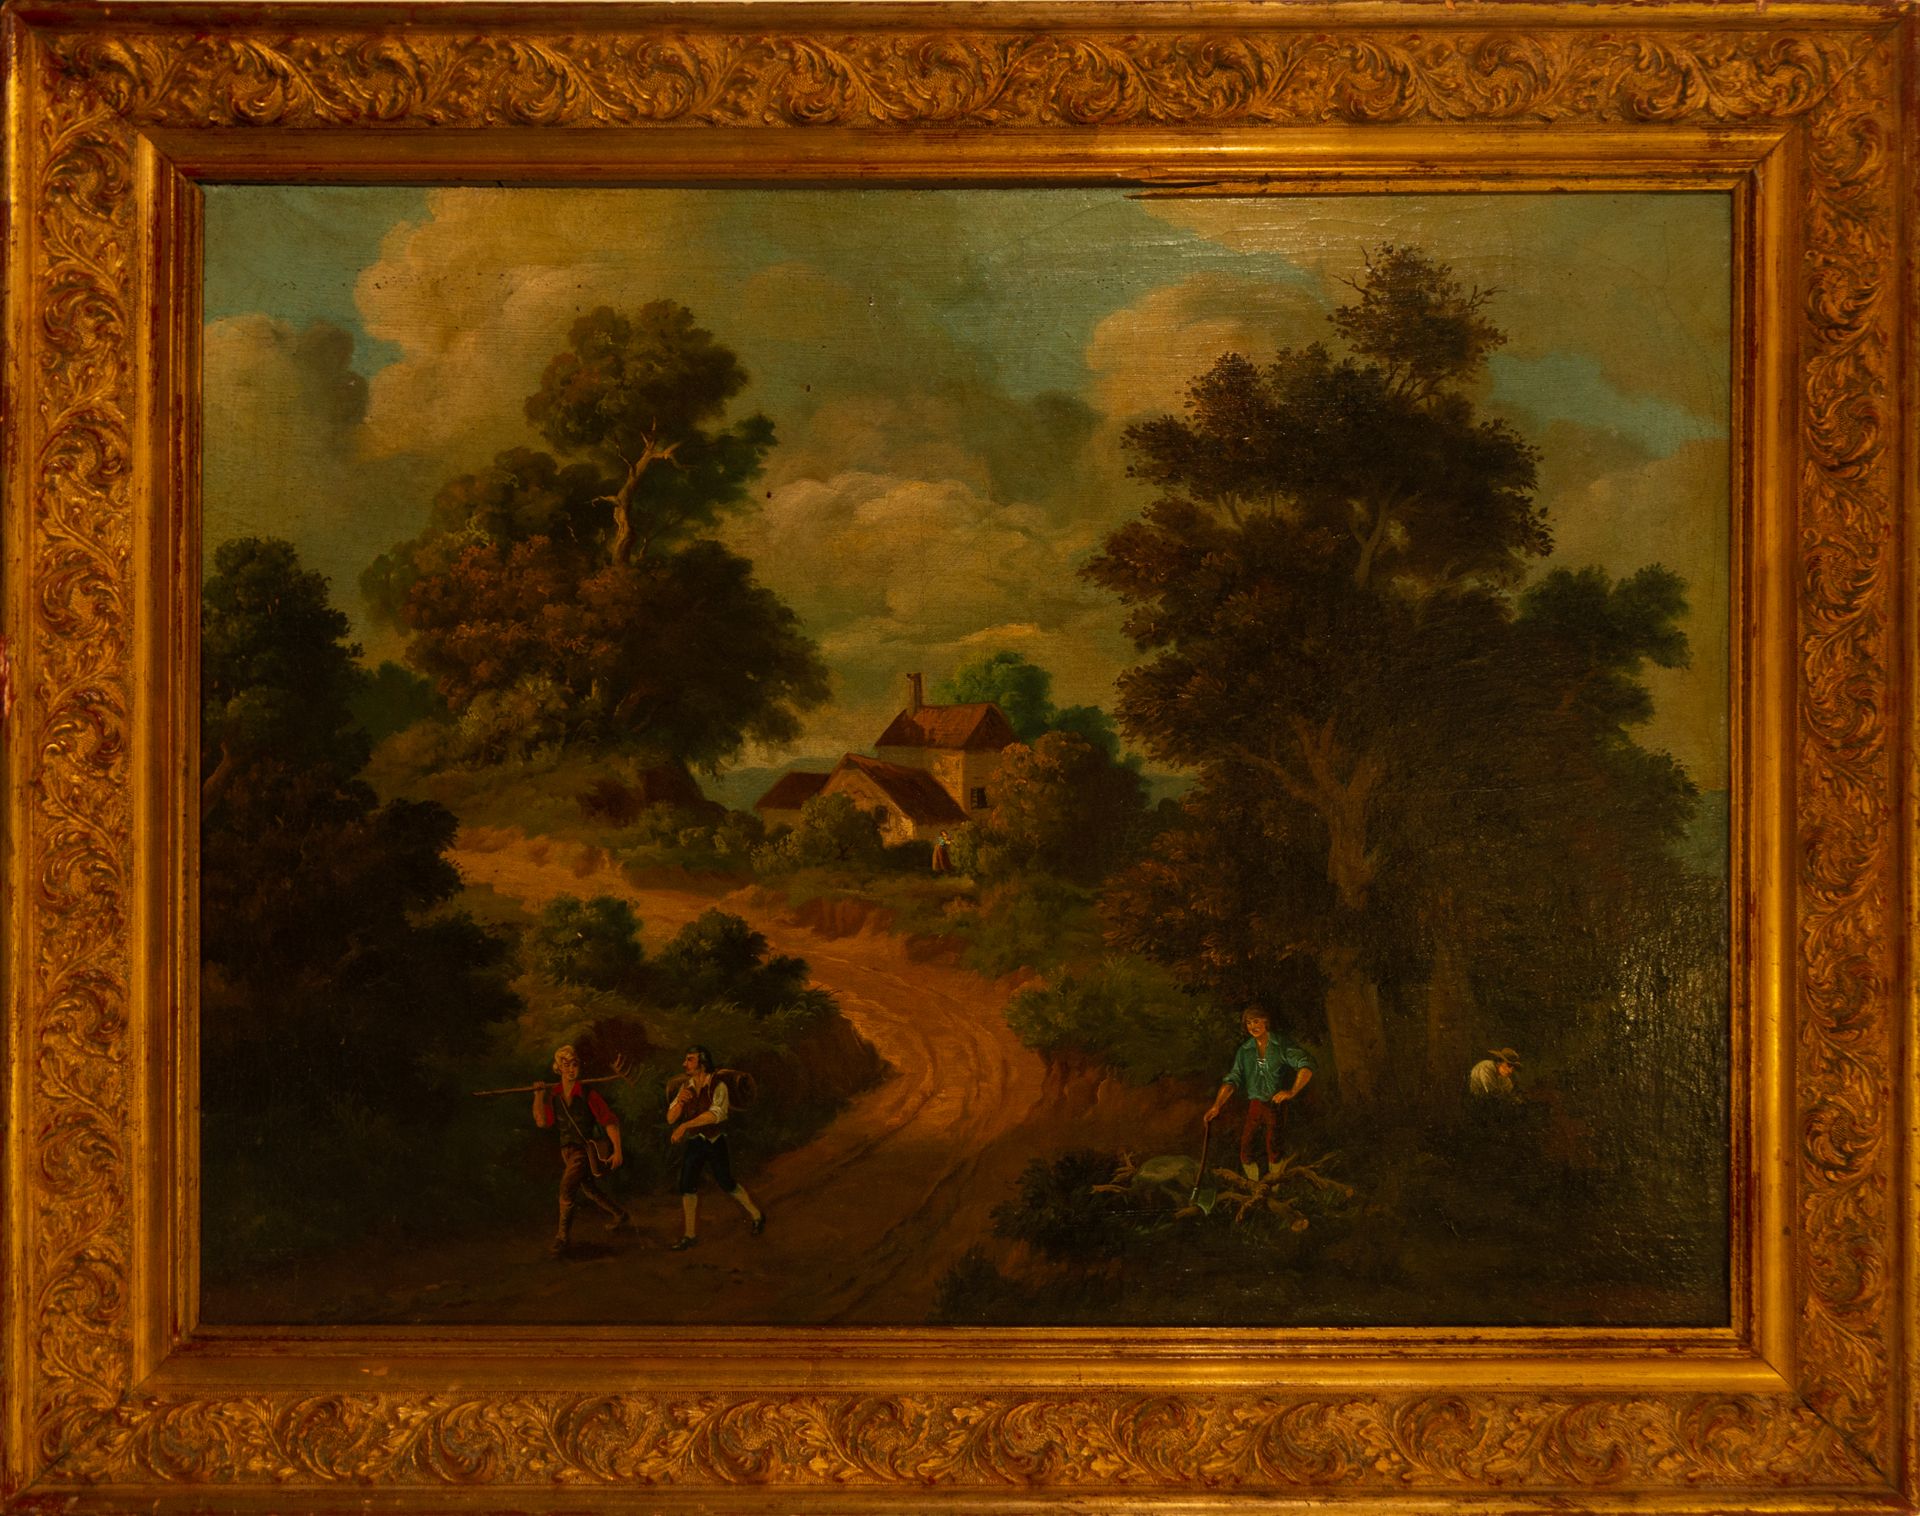 Country Scene with Peasants, 19th century Dutch school, following 17th century models